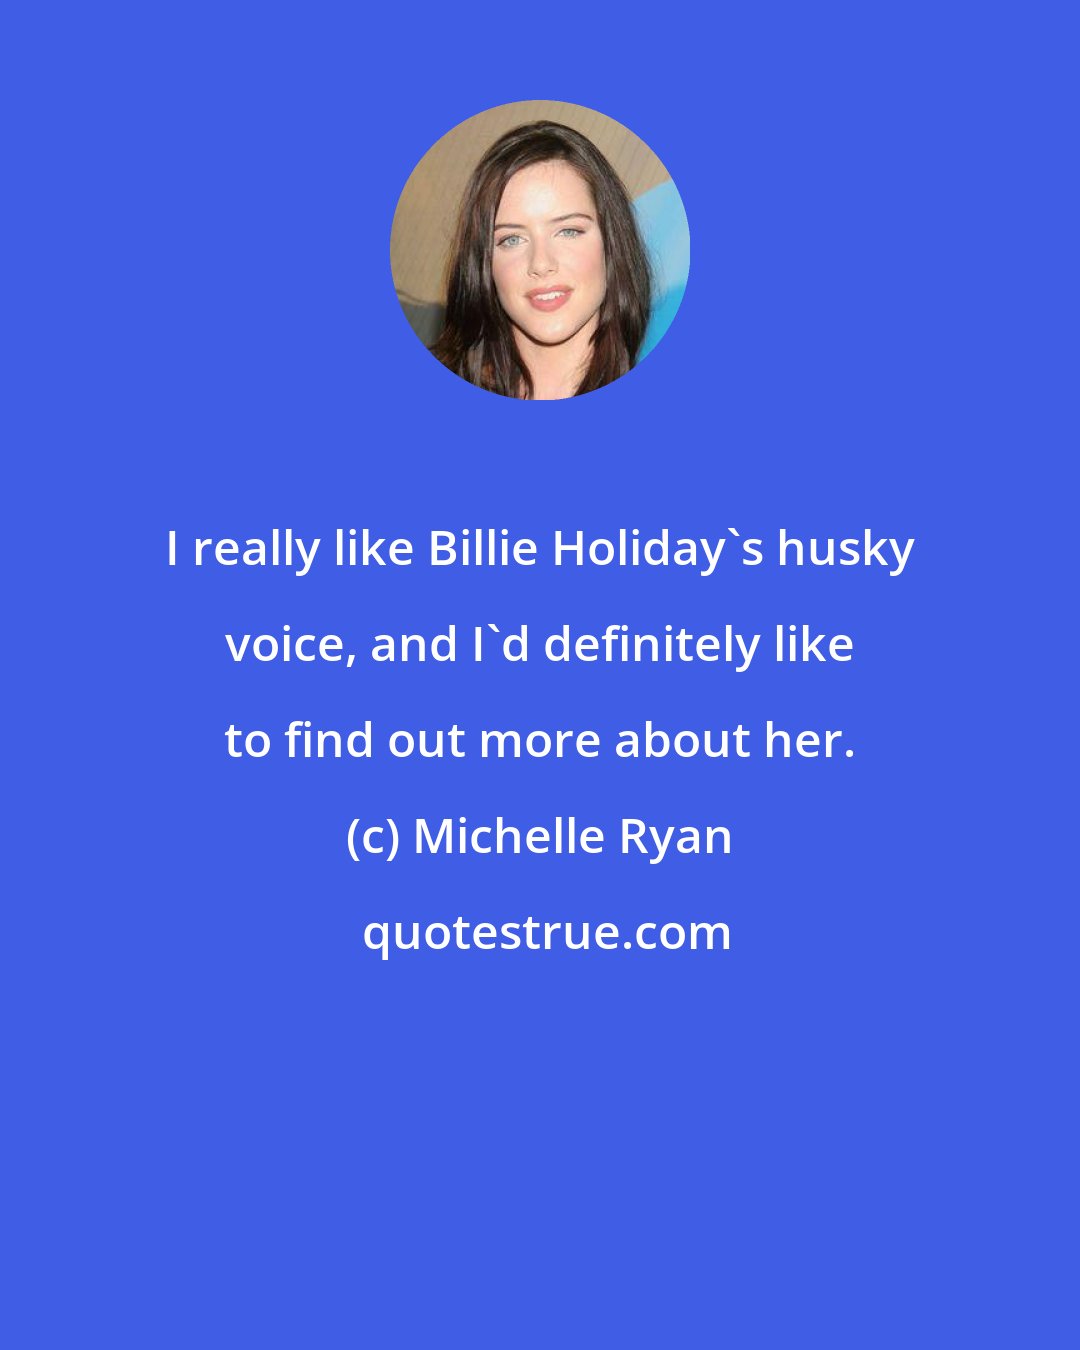 Michelle Ryan: I really like Billie Holiday's husky voice, and I'd definitely like to find out more about her.